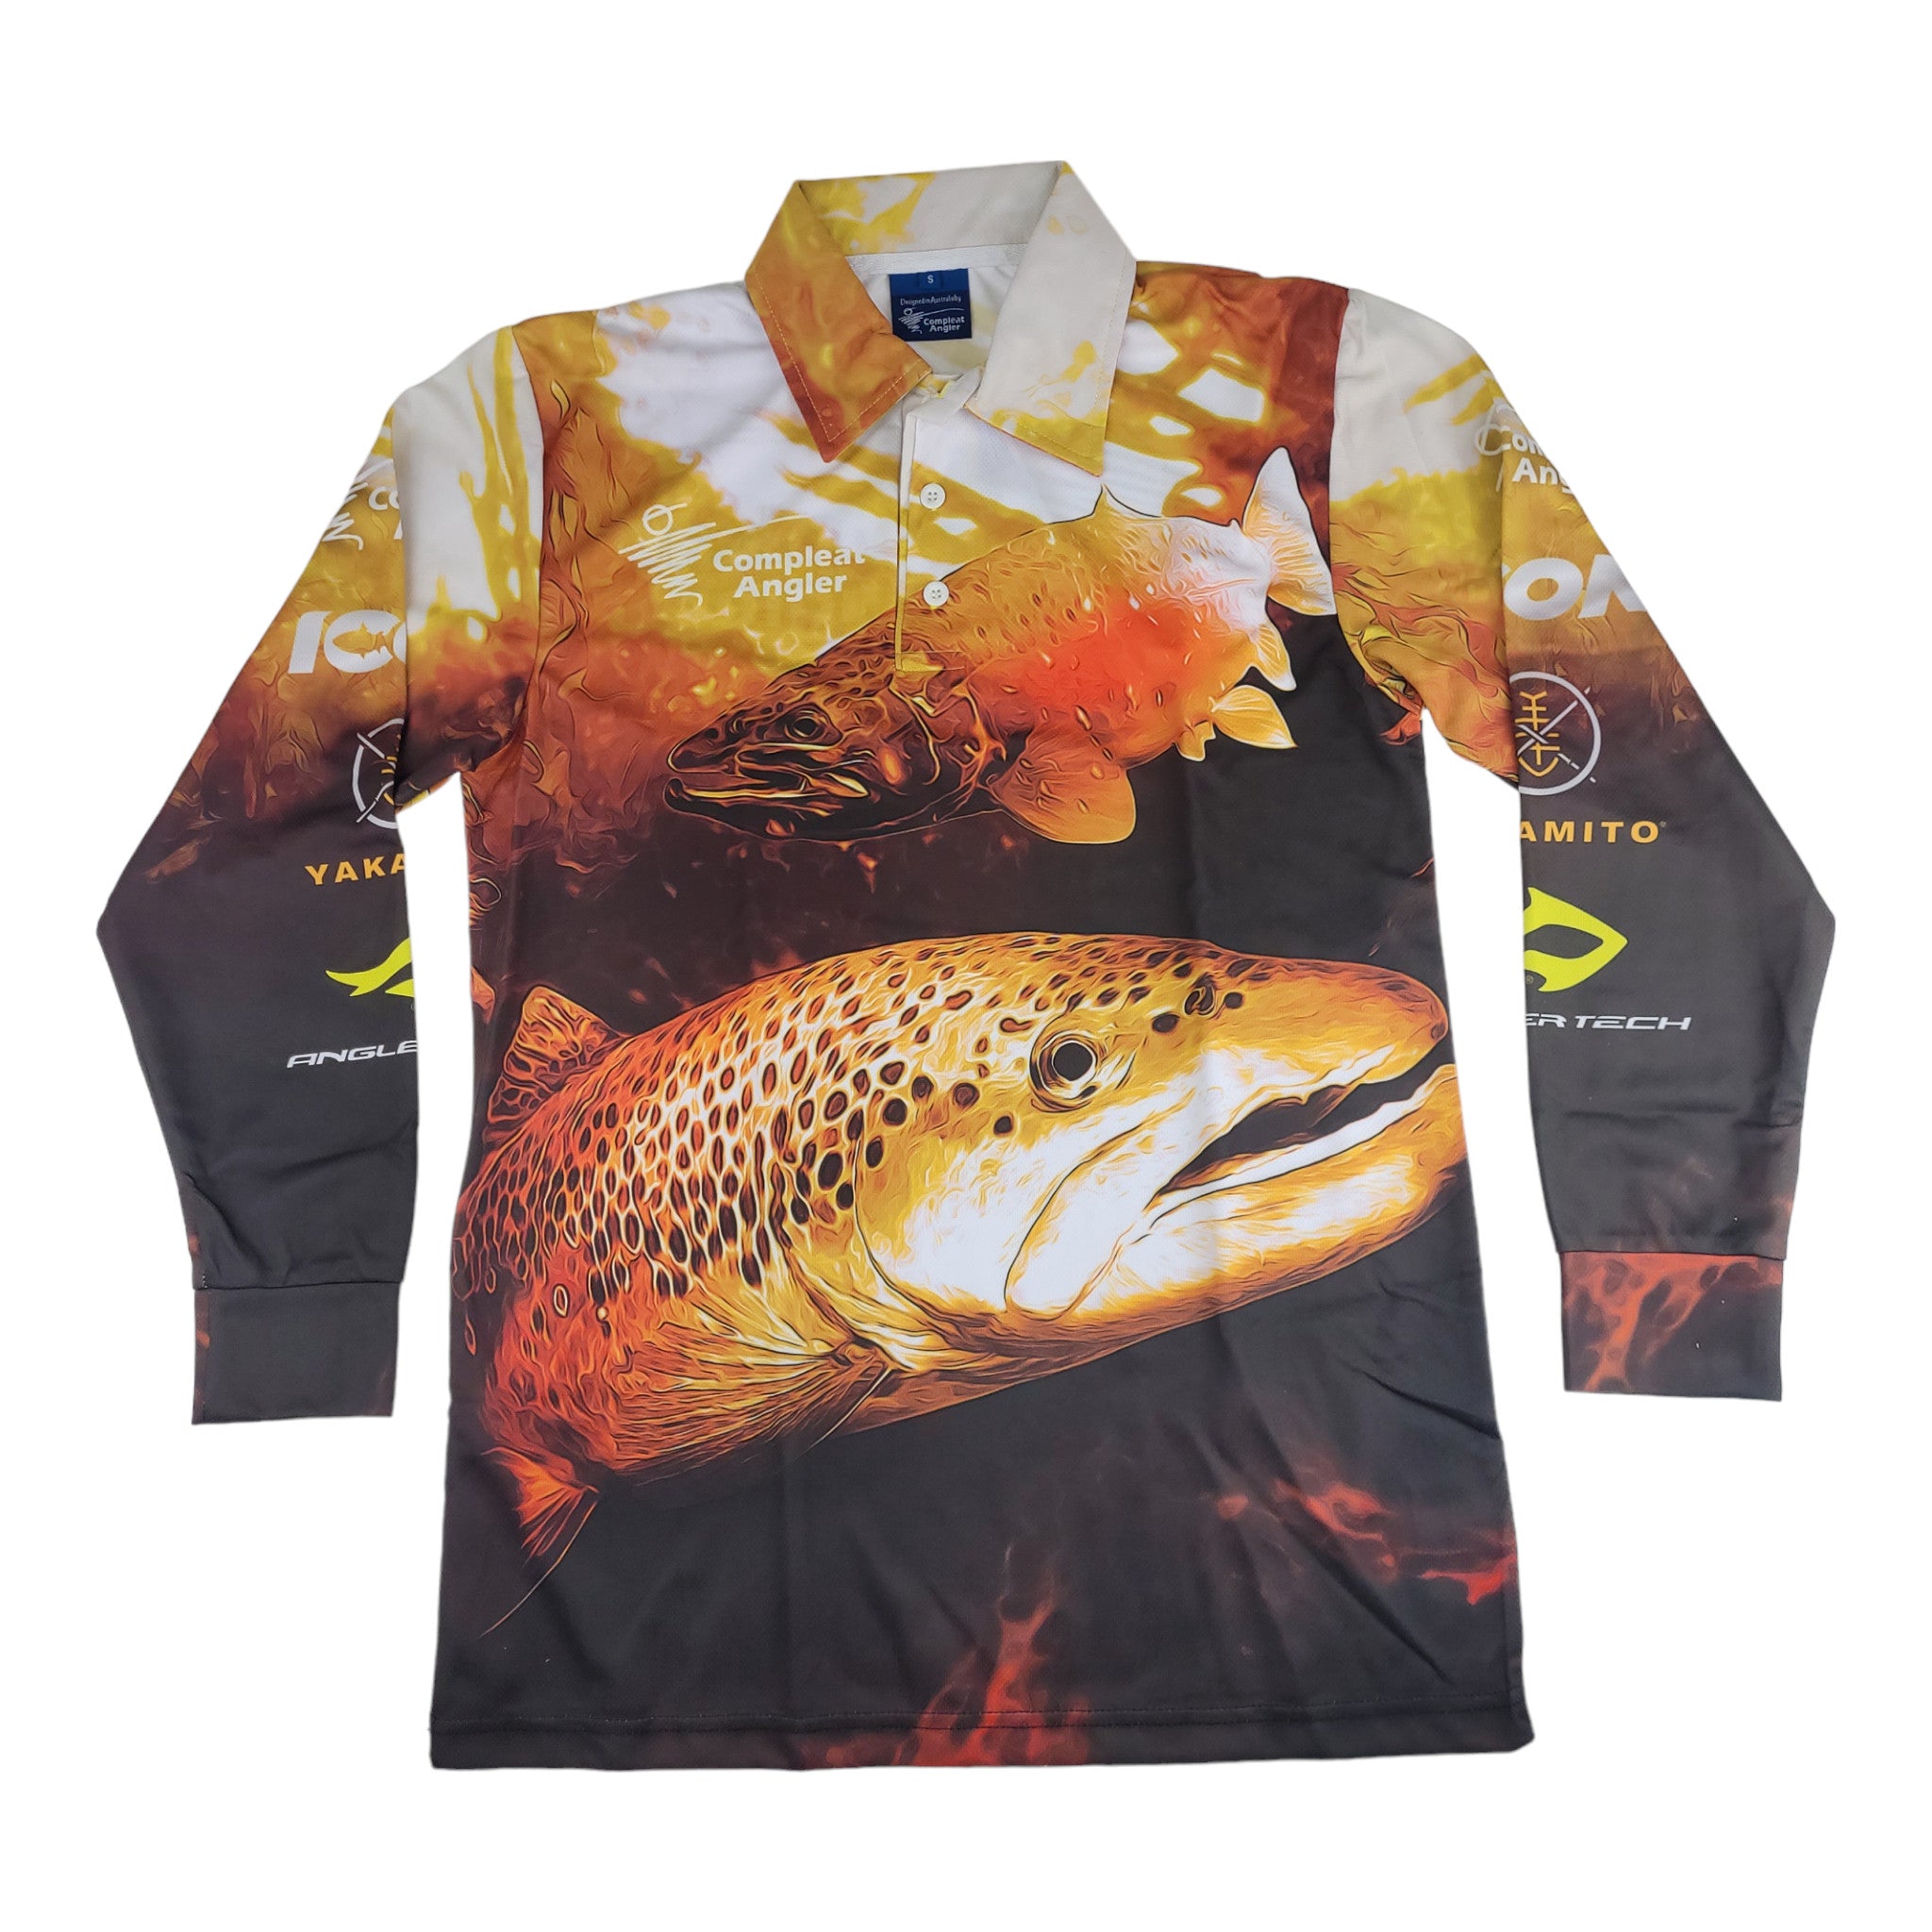 Compleat Angler Trout Tournament Shirt